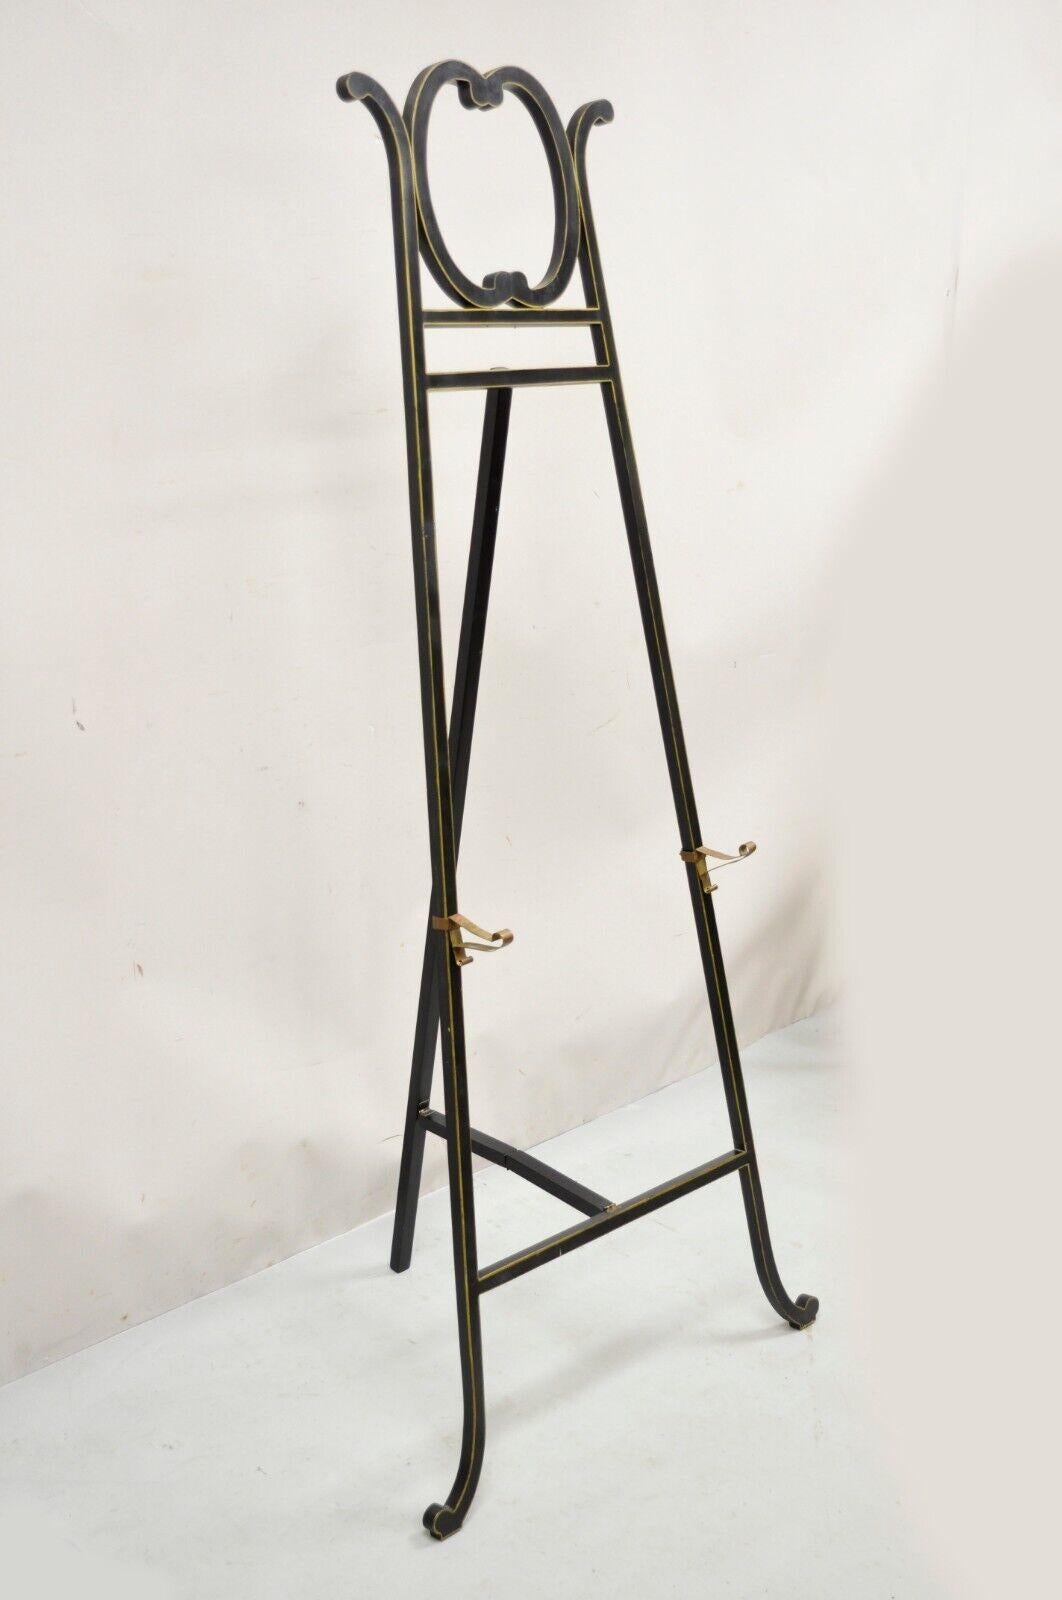 Vintage Victorian Aesthetic movement style Black Ebonized Art Painting Easel. Item features adjustable brass supports, folding design, ebonized finish with gold accents, solid wood frame, very nice item, great style and form. Circa mid 20th